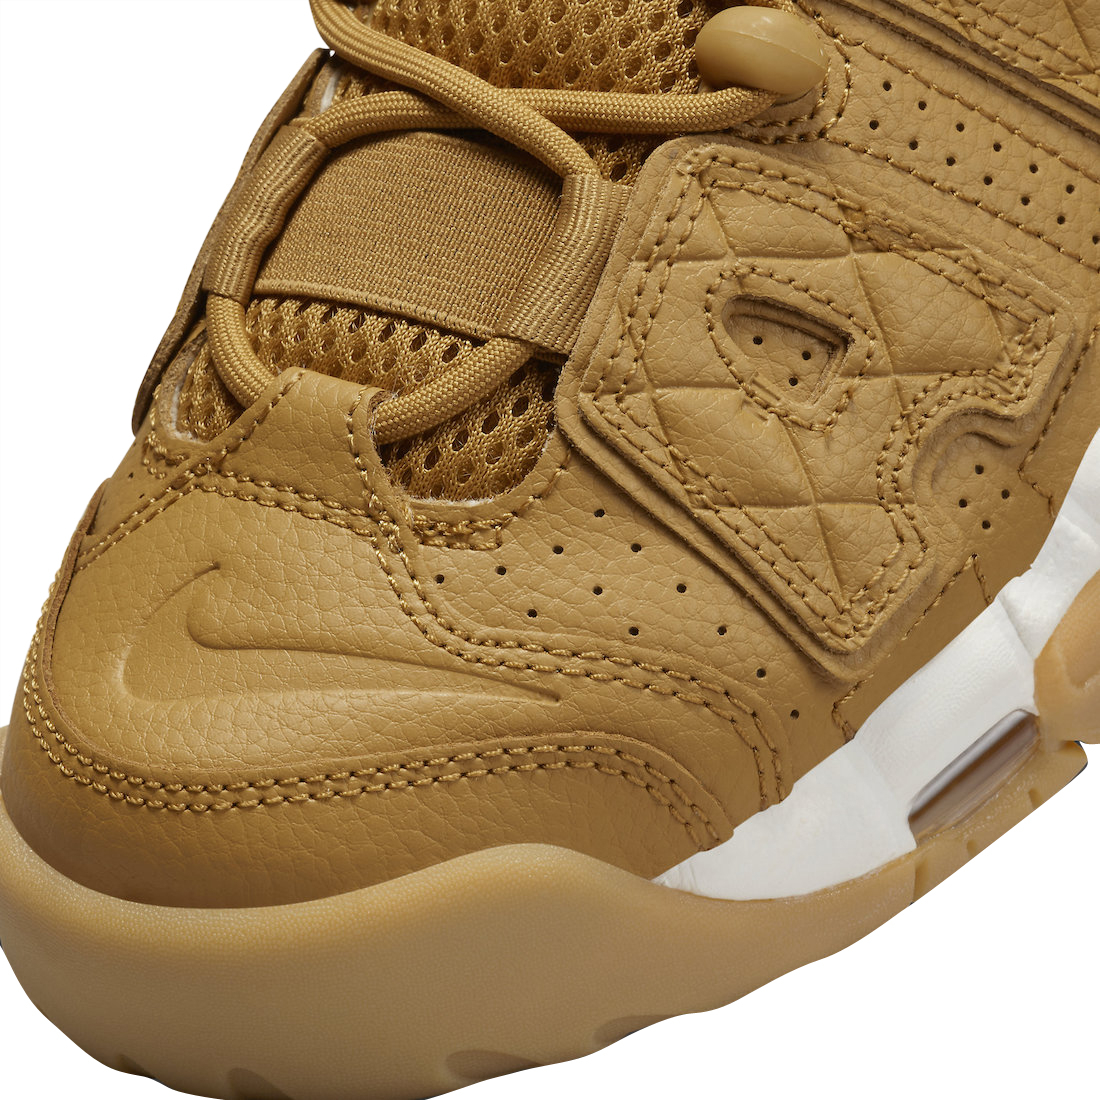 Nike WMNS Air More Uptempo Wheat Gum DX3375-700